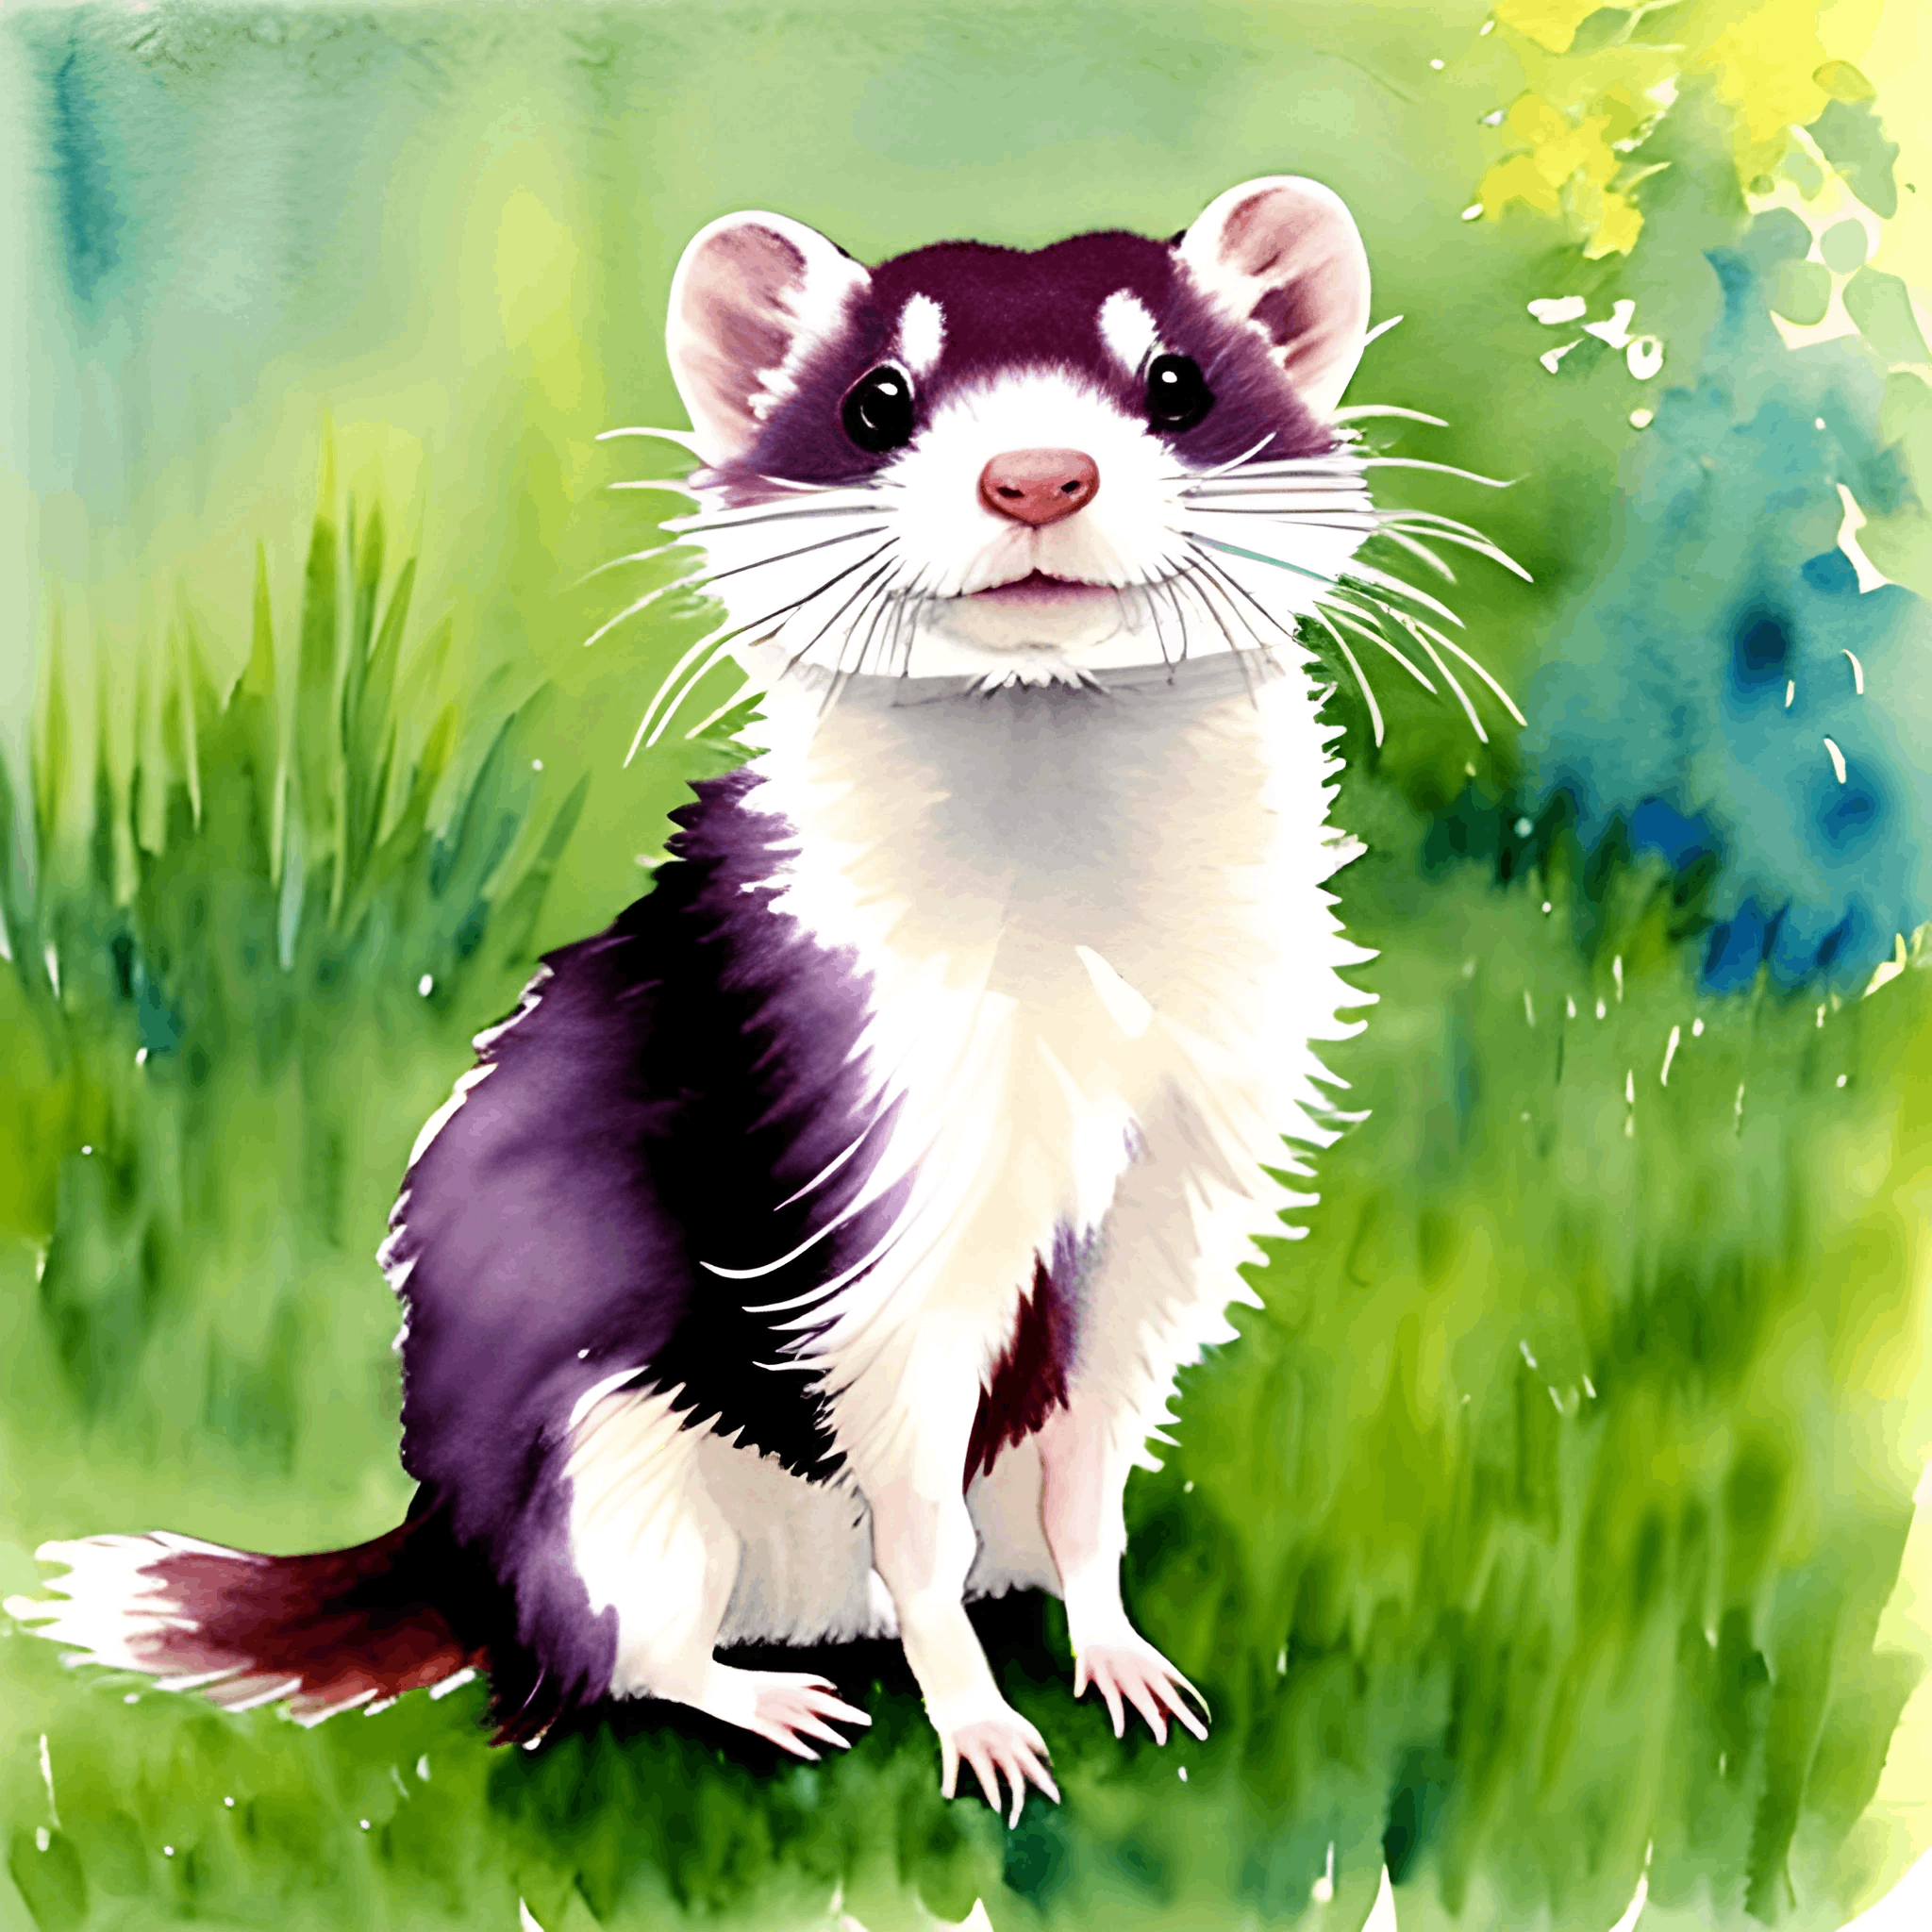 painting of a ferret sitting in the grass with a green background